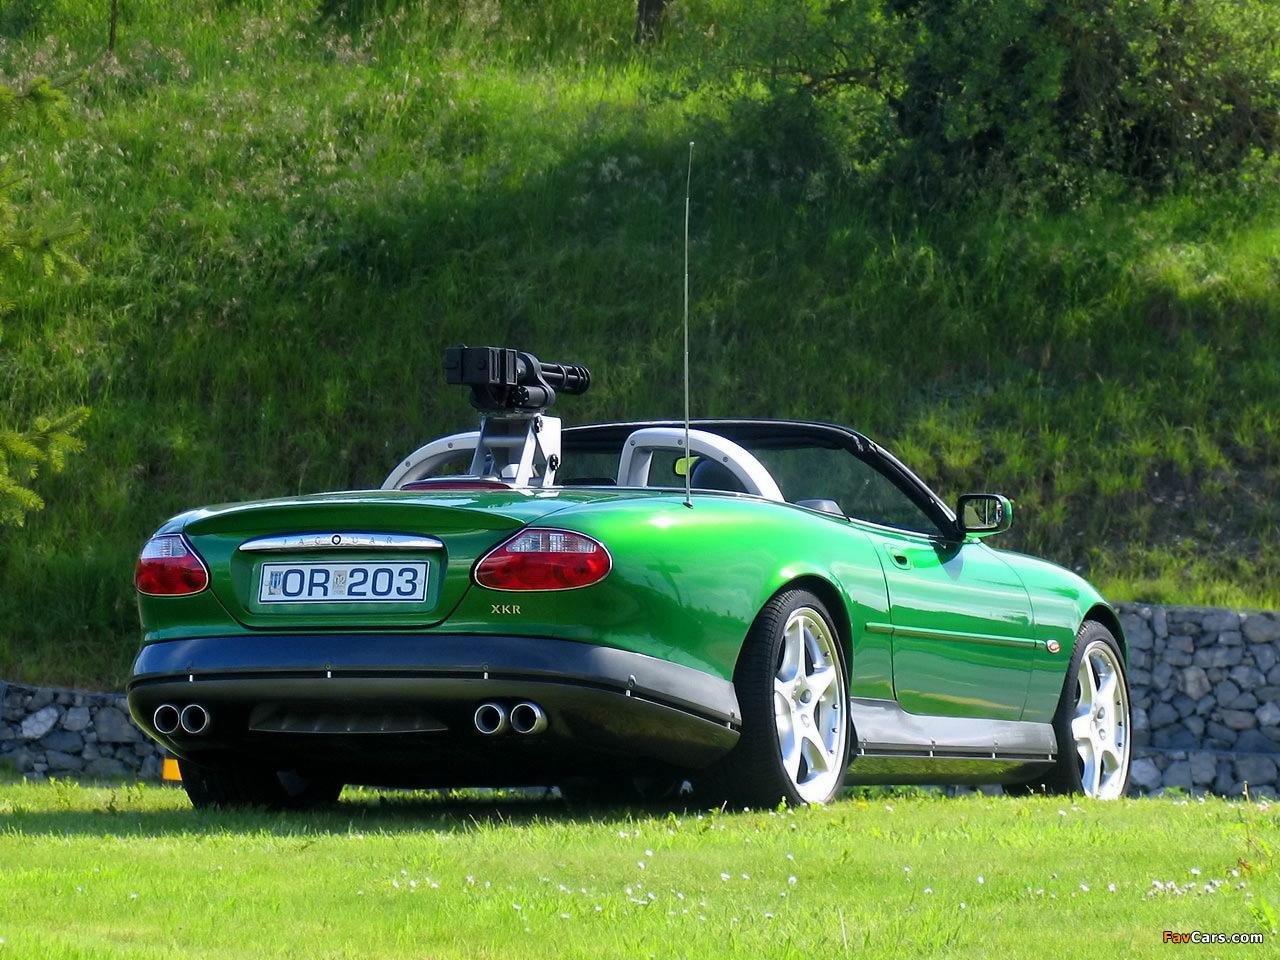 Jaguar XKR Convertible 007 Die Another Day 2002 picture (1280x960)